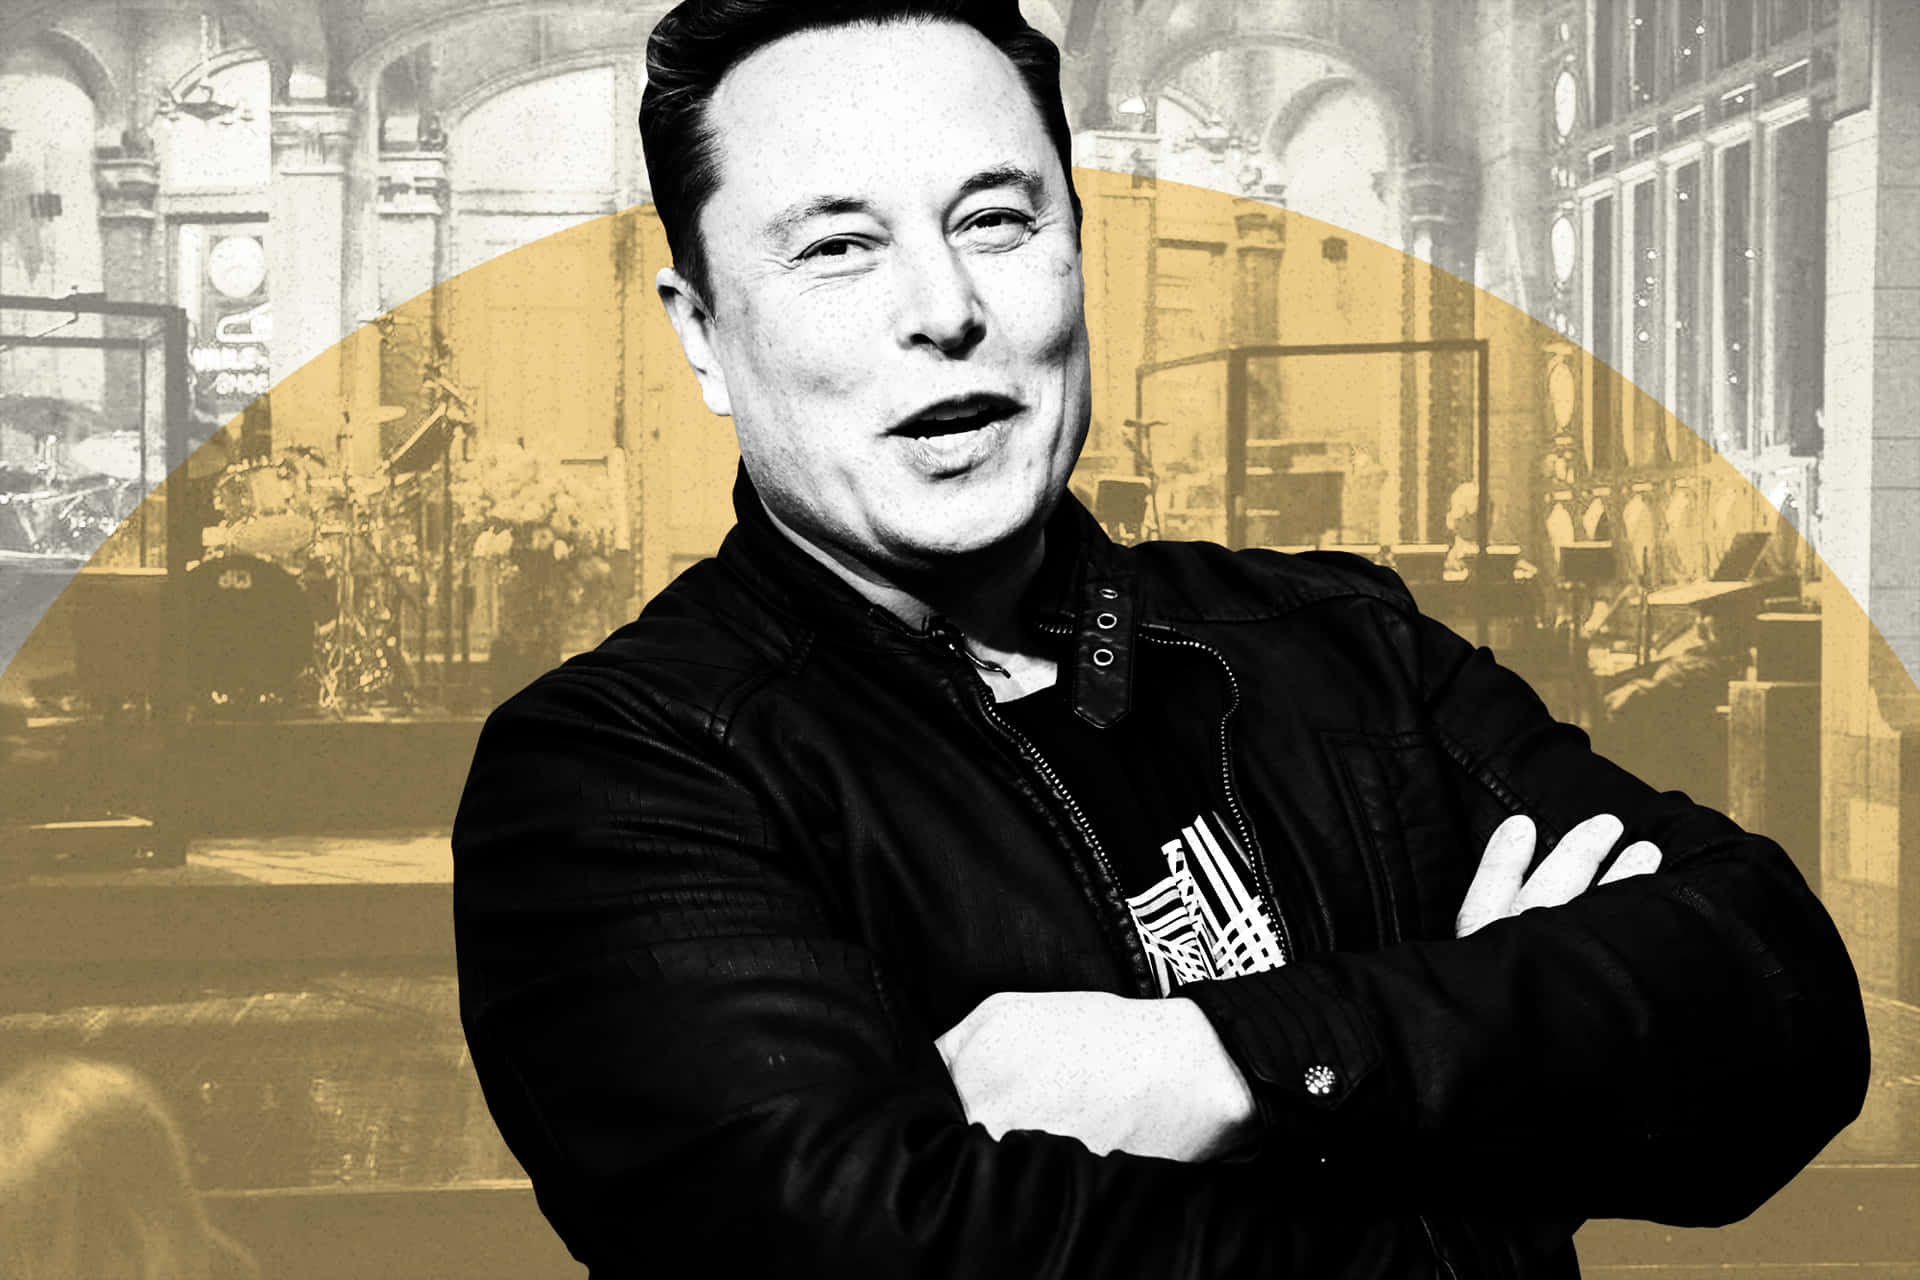 Elon Musk - The Visionary behind U.S. Electric Vehicle and Space Exploration